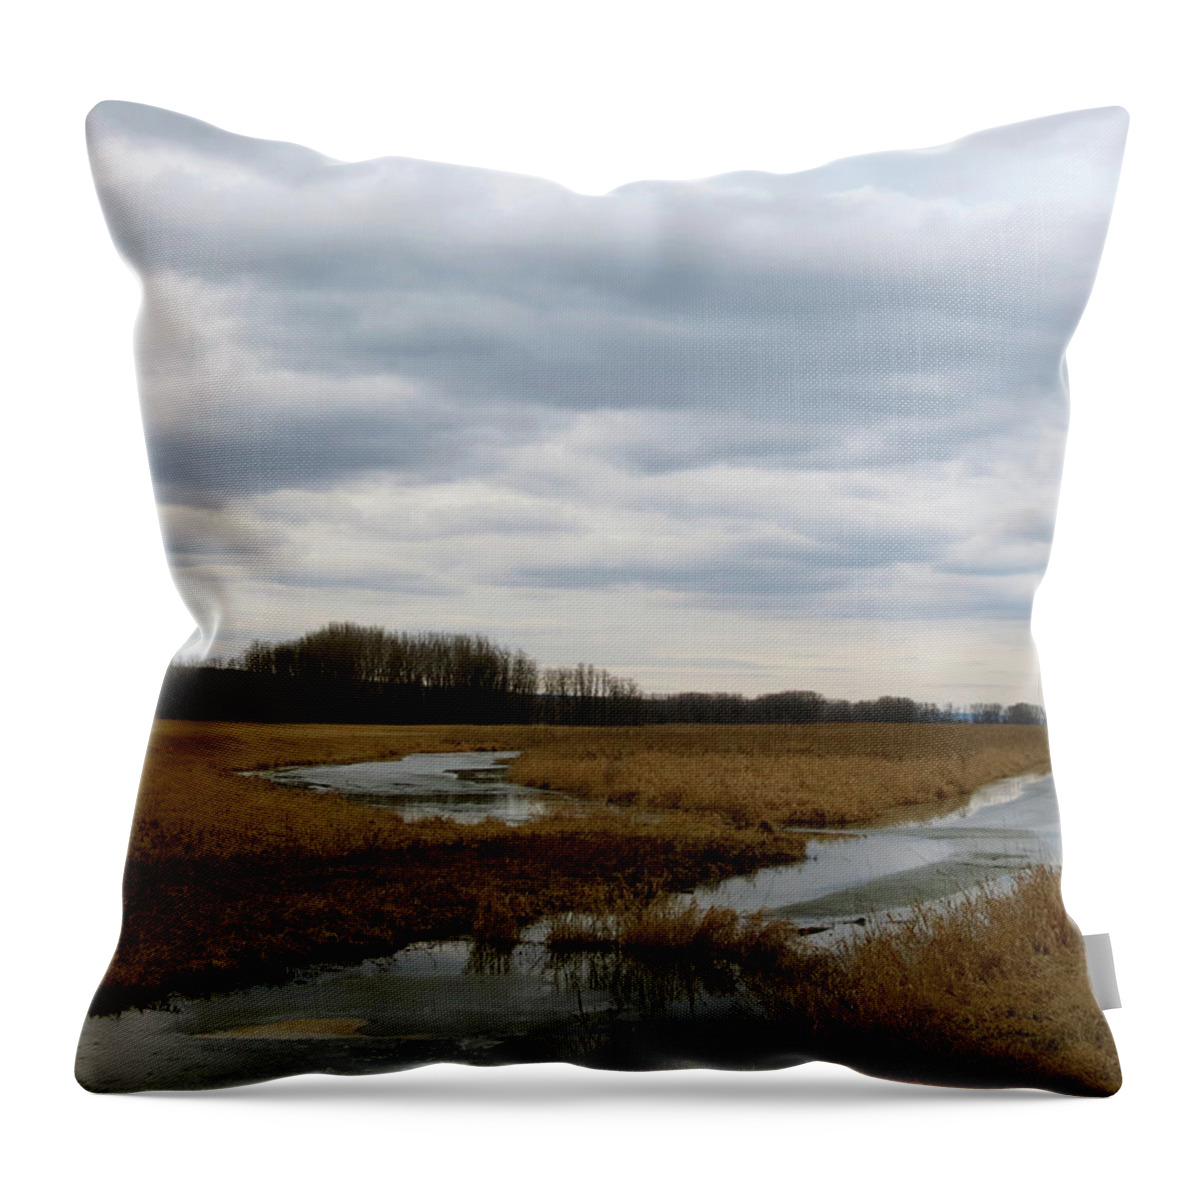 Marsh Throw Pillow featuring the photograph Marsh Day by Azthet Photography